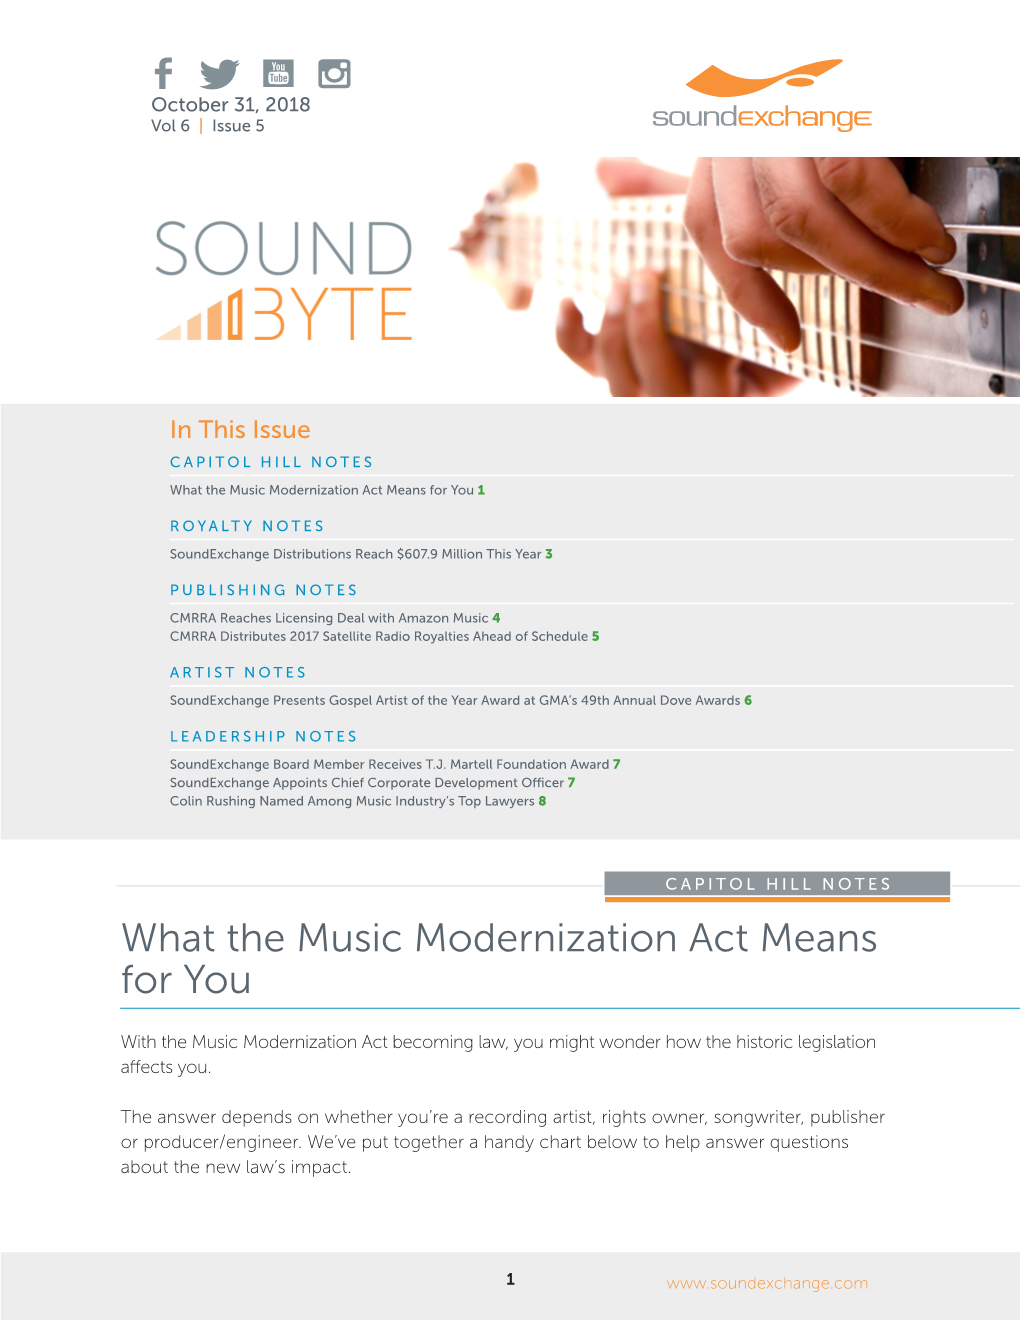 What the Music Modernization Act Means for You 1